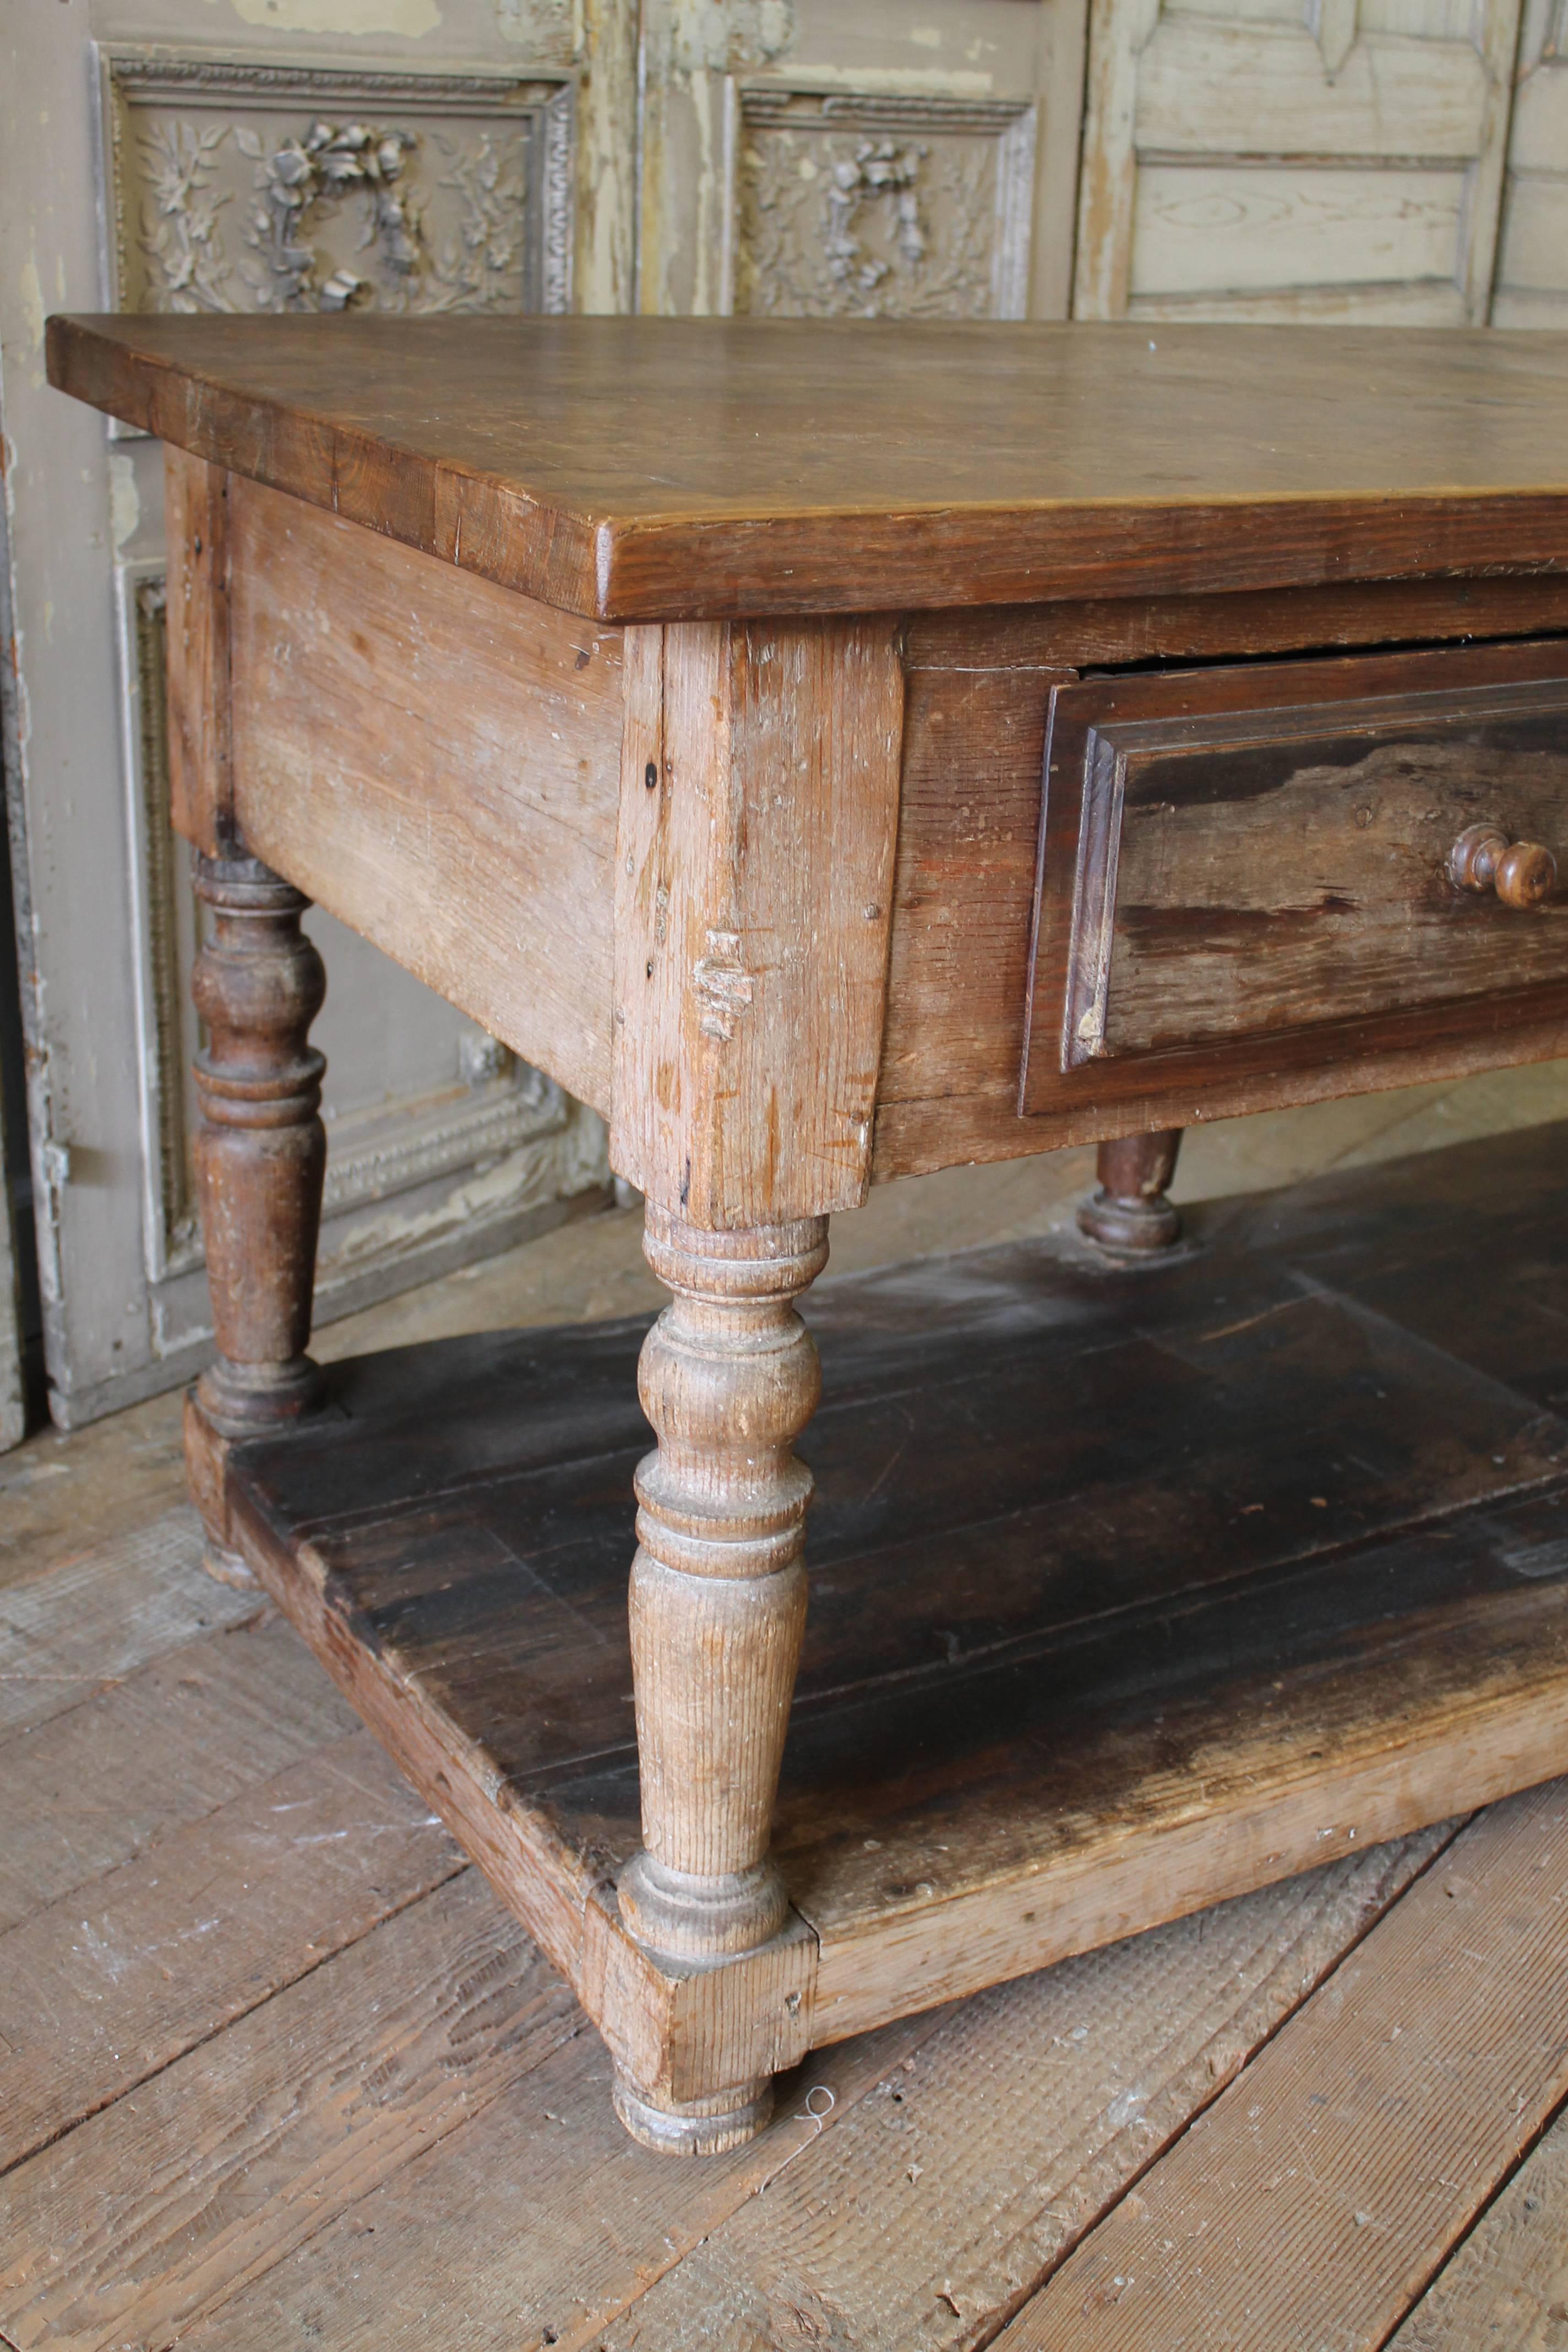 Well loved antique drapers table with weathered patina. This antique French drapers table ("table de drapier" in French) featuring two drawers on the front and a large second shelf on the bottom and turned legs. These tables were commonly